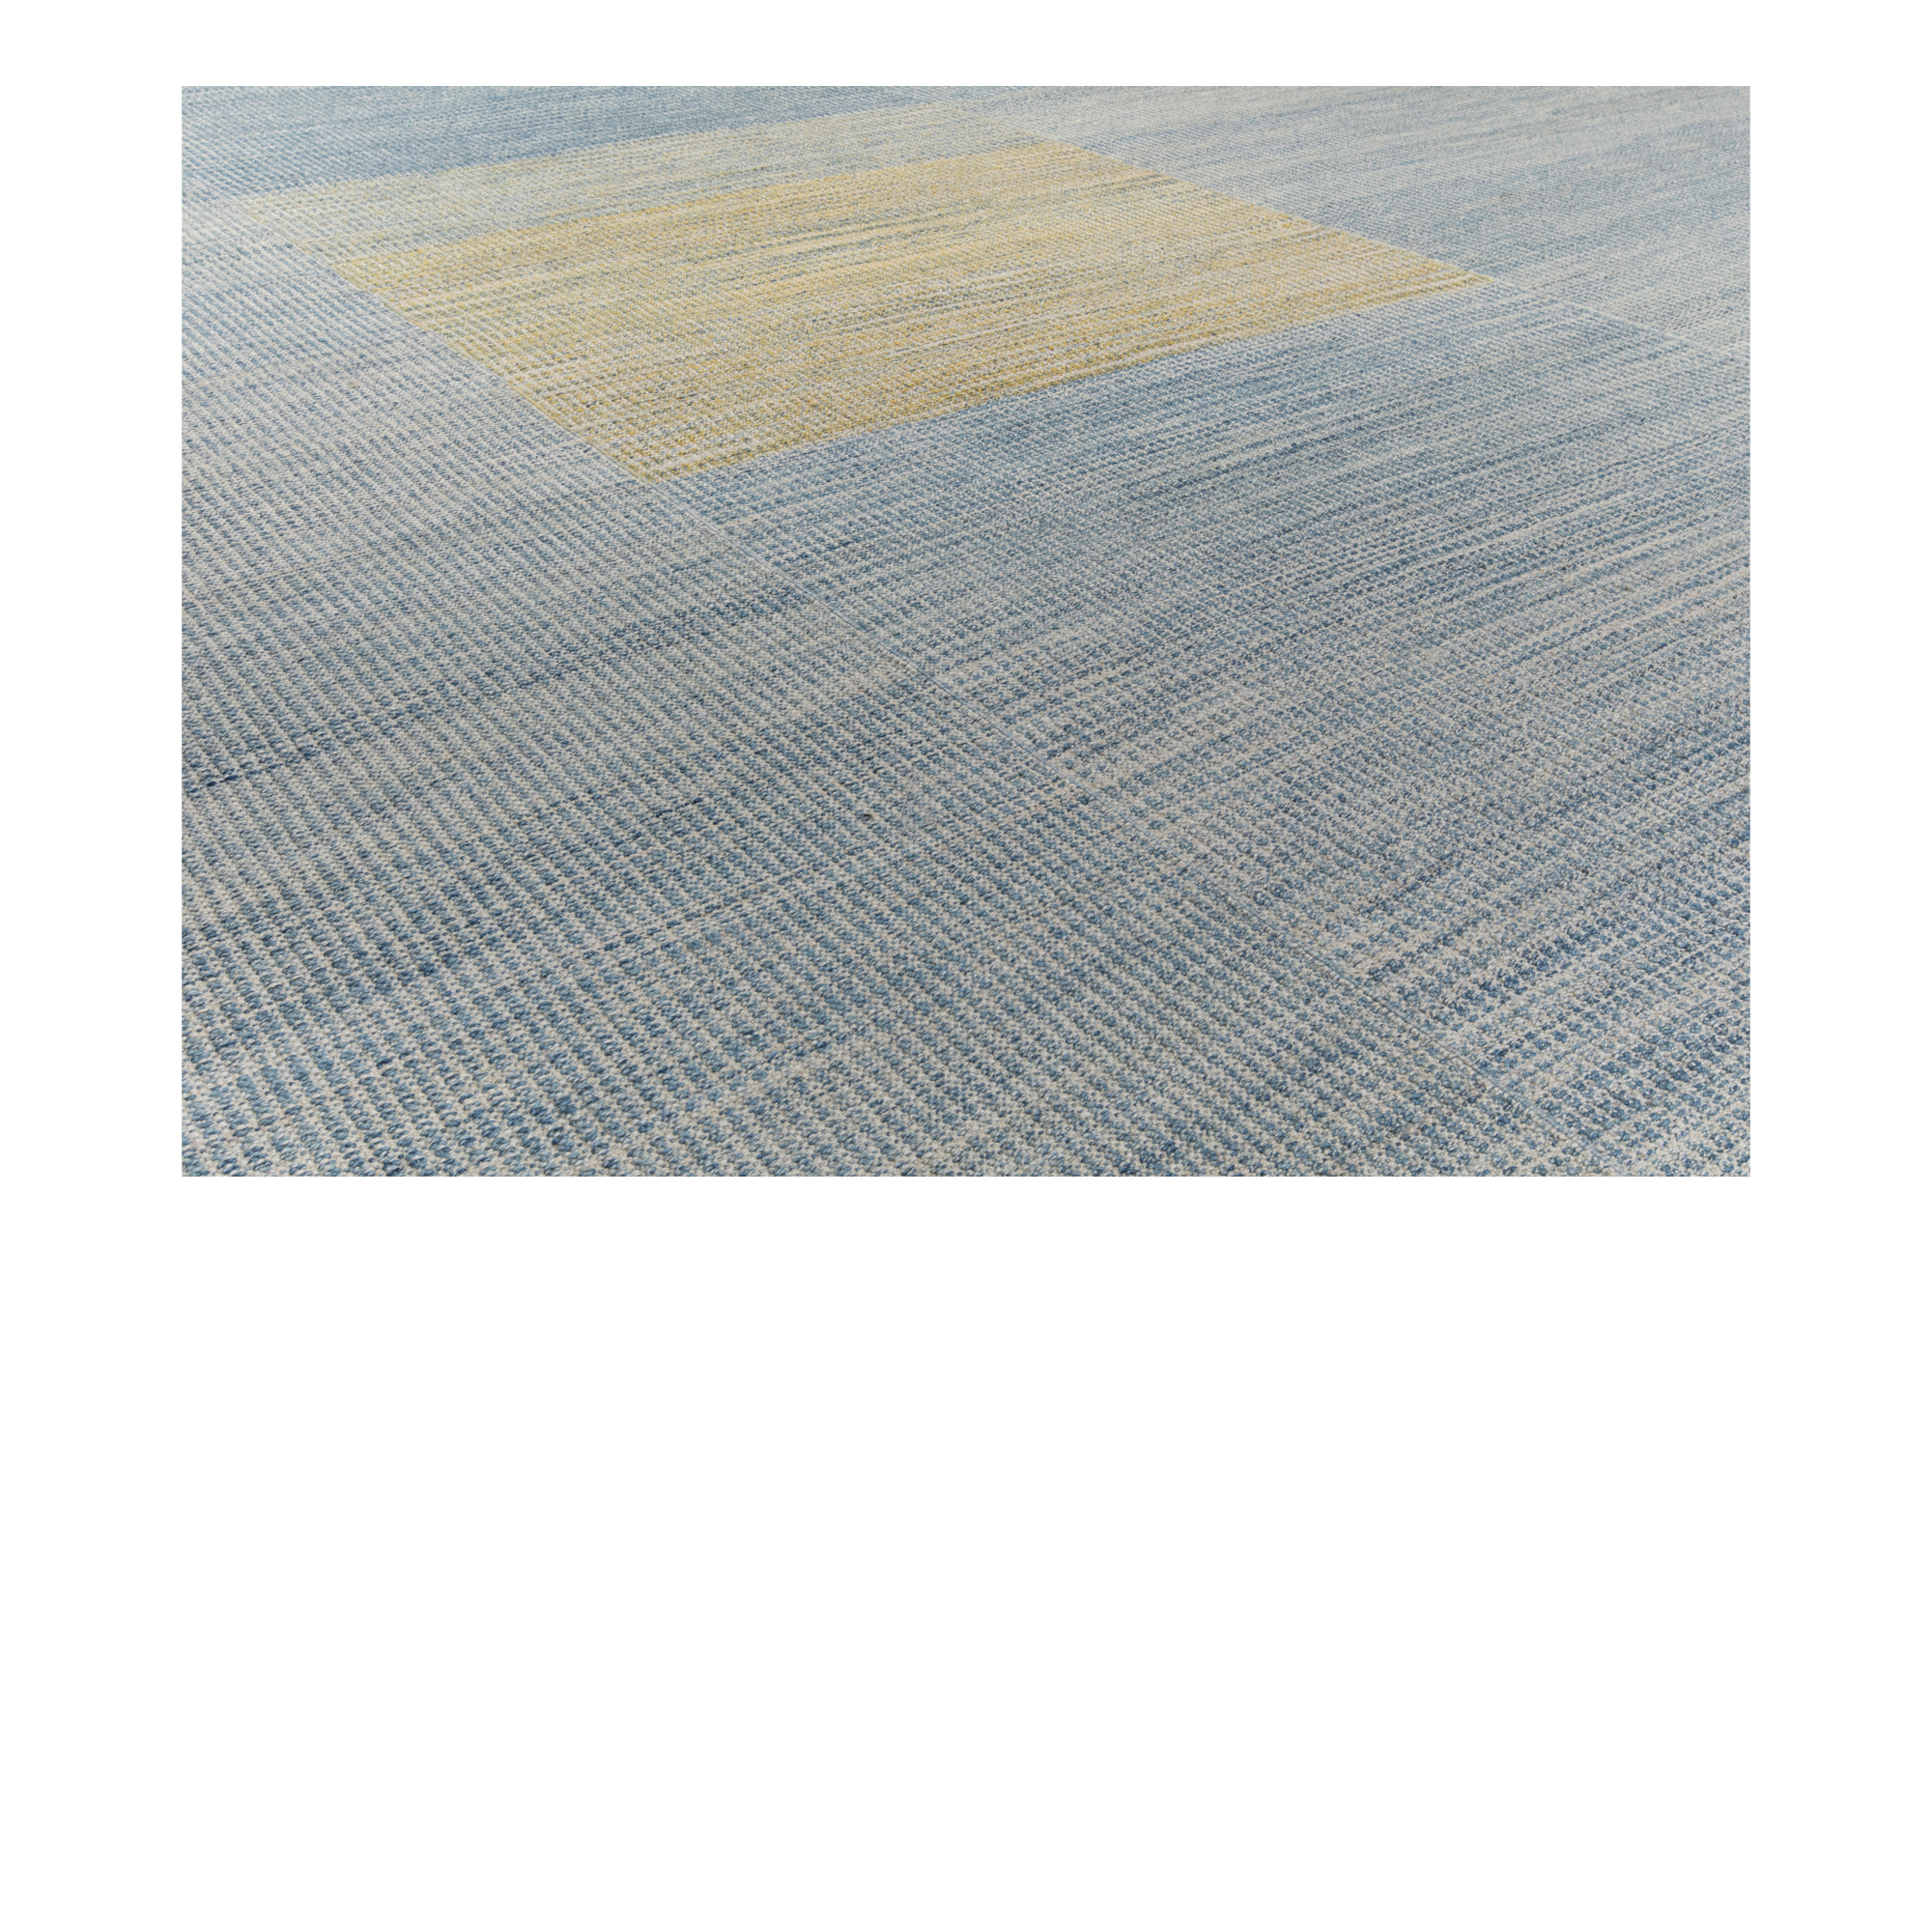 This Charmo flatweave rug is hand-woven and made of 100% and made of handspun wool. 